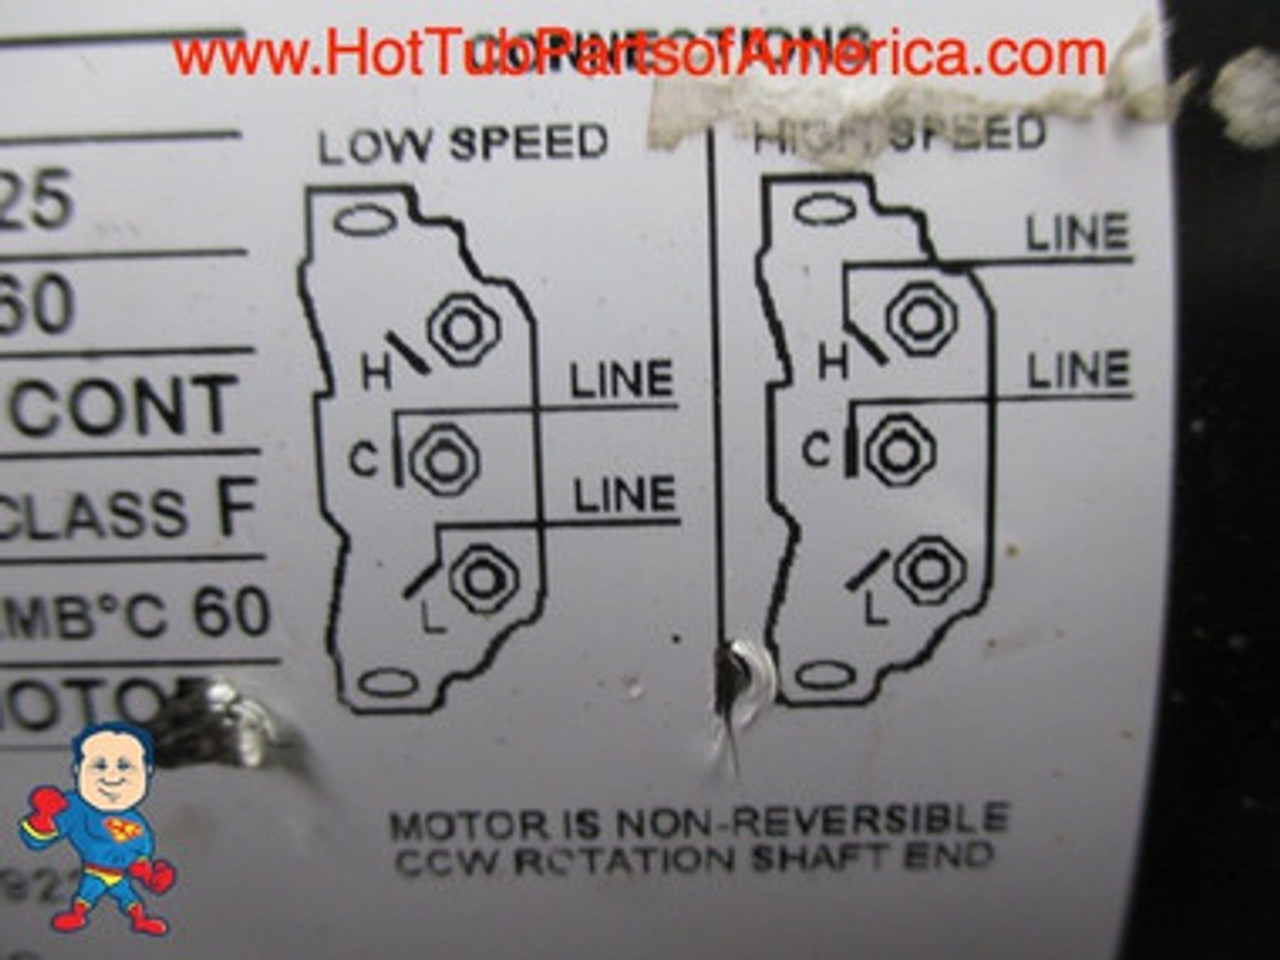 An Example of a 230V (2) Speed Emerson motor wiring on the Motor End:
High Speed Red Wire goes on (H) for High Speed
Common or Neutral White Wires goes on (C) for Common or Neutral.. Note: In this case this wire would be Hot 115V..
Low Speed Black wire goes on (L) for Low Speed
Green goes on 1/4" Screw to the body cover...